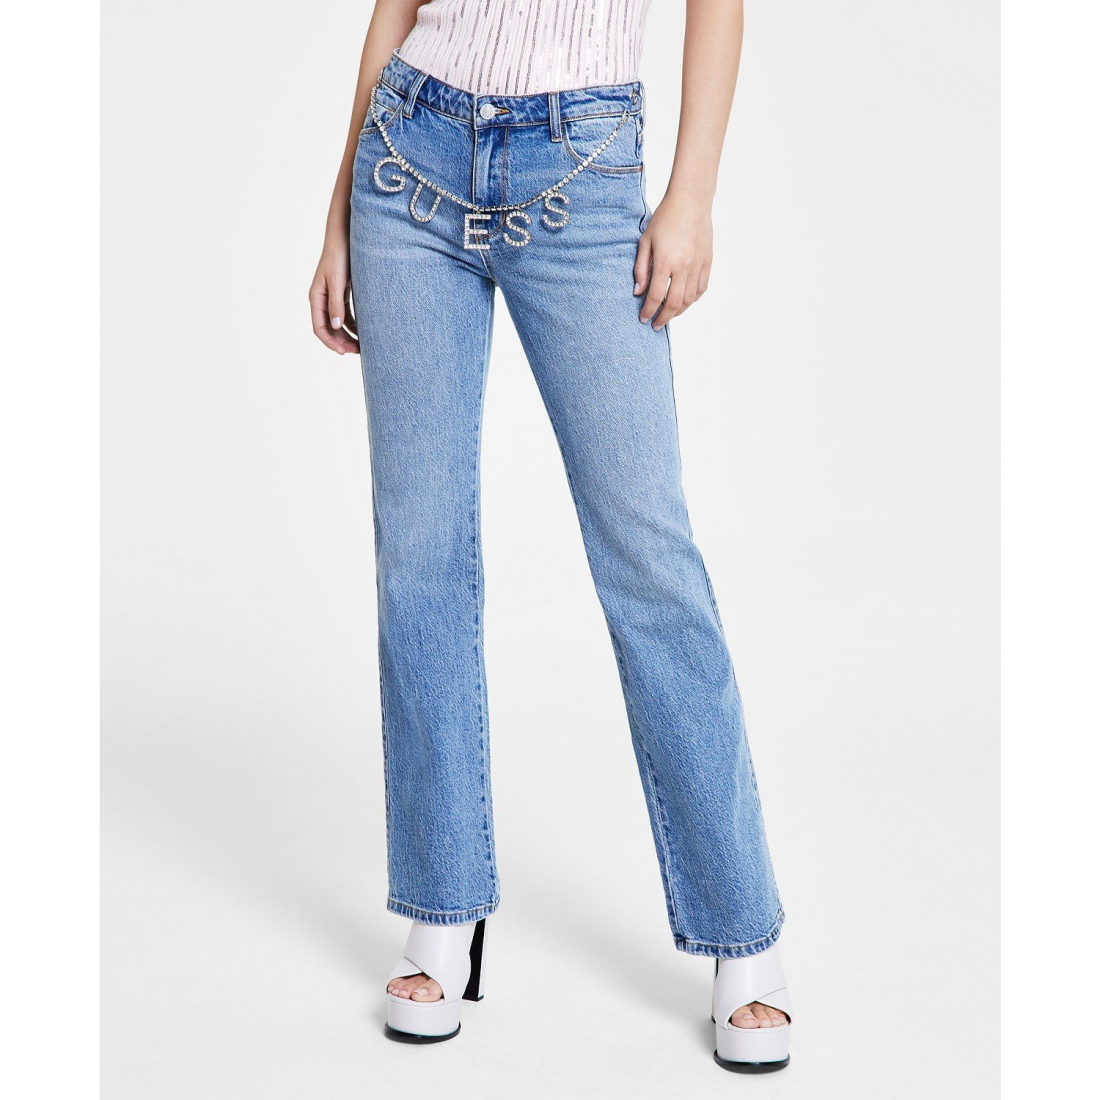 Women's 'Embellished-Chain' Jeans